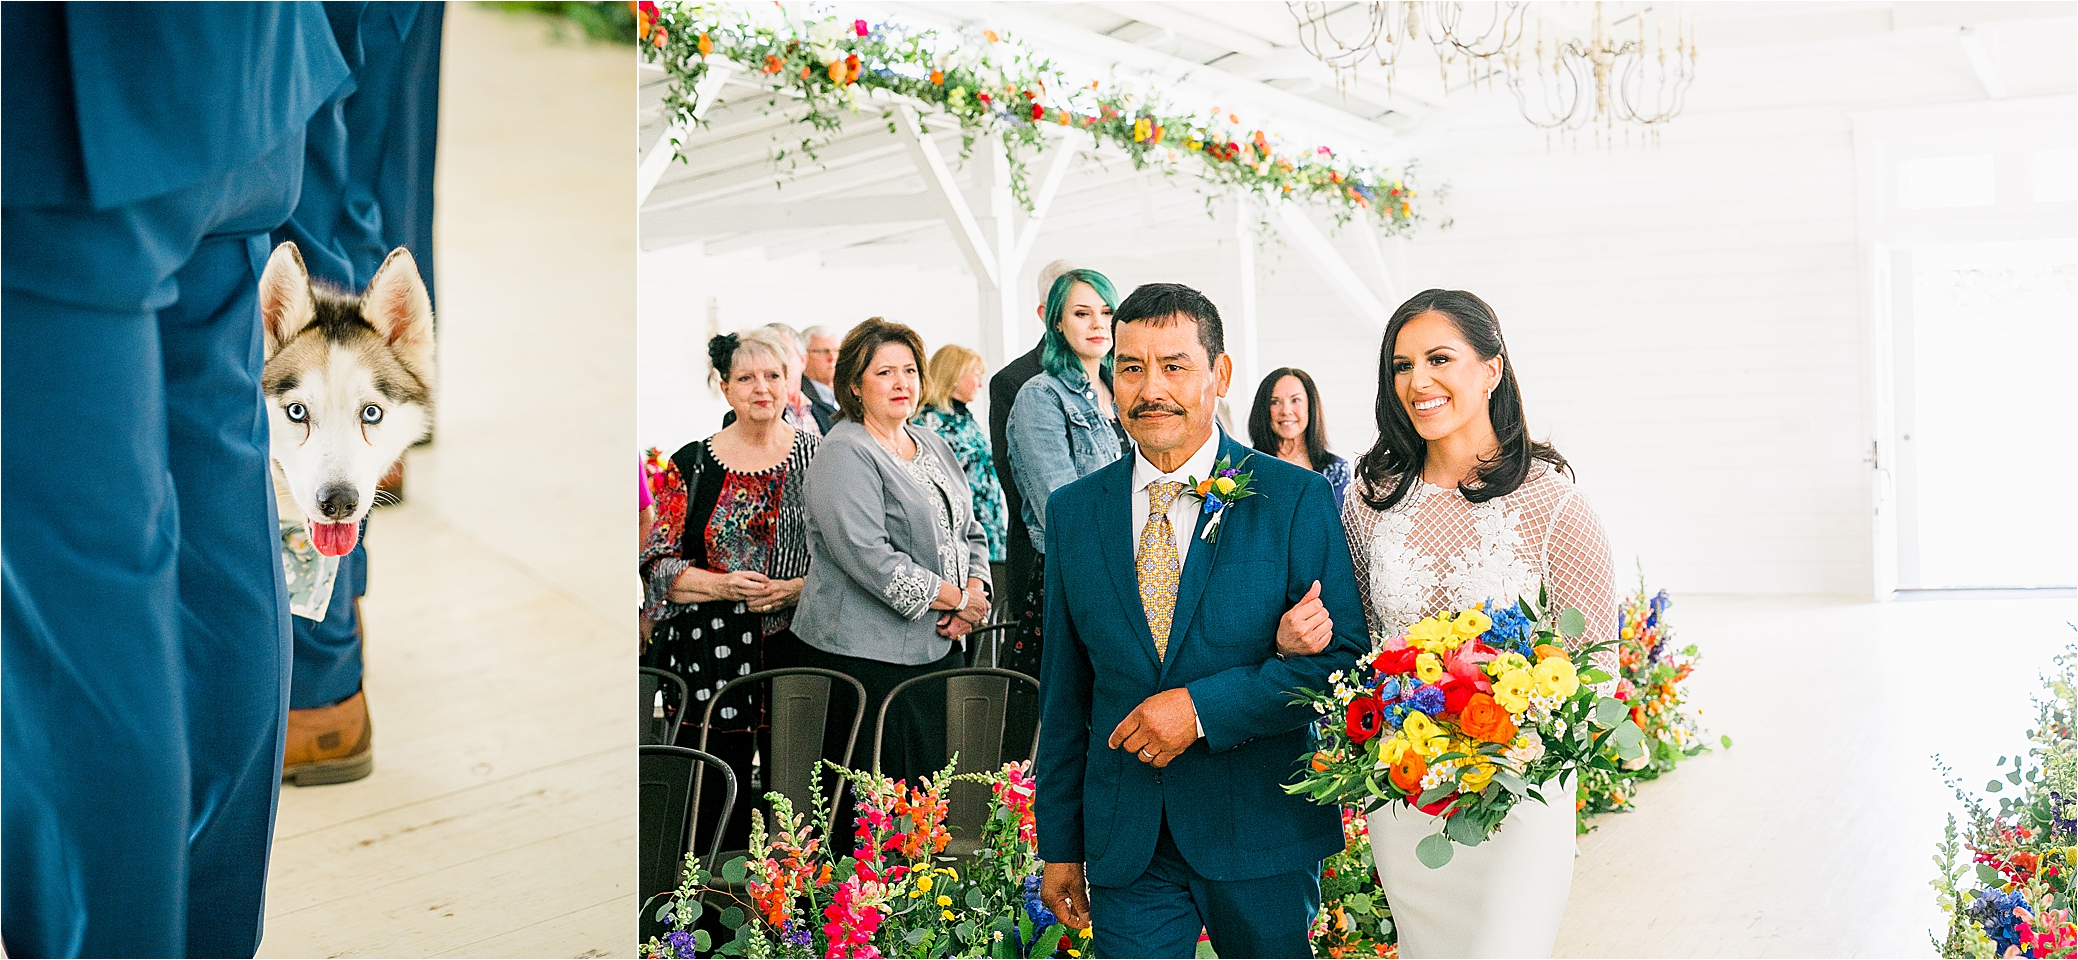 A bride walks down the aisle with her dad and colorful bouquet while her husky peeks out behind the groomsman's leg. 